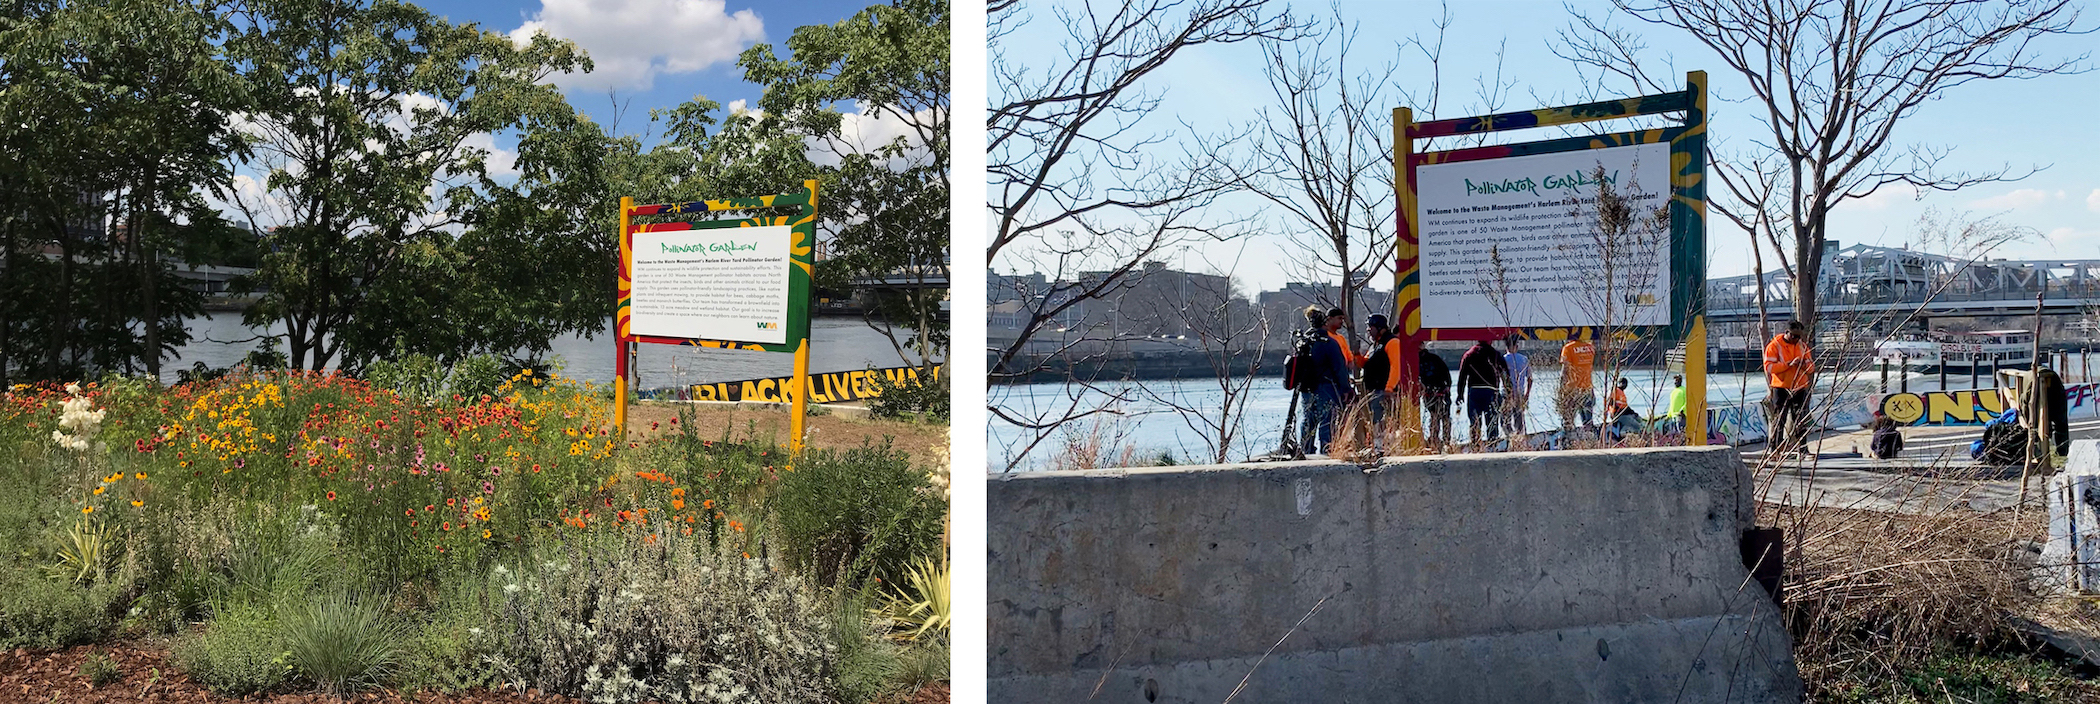 Two images side by side of the same waterfront area with the same sign. The image on the left has greenery and flowers that are dead in the right image.